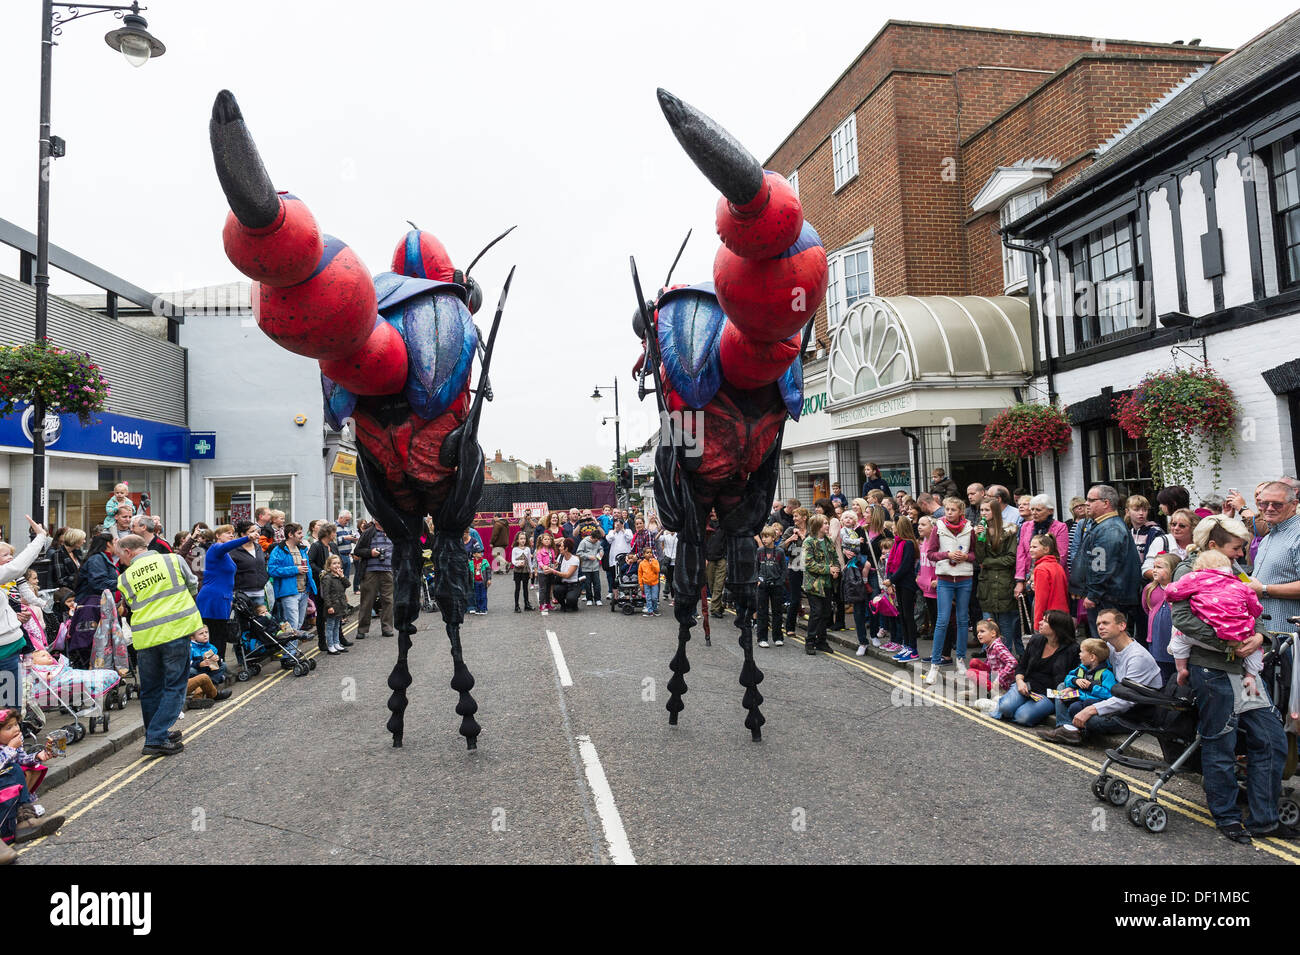 The Insects performing at the Witham Puppet Festival. Stock Photo